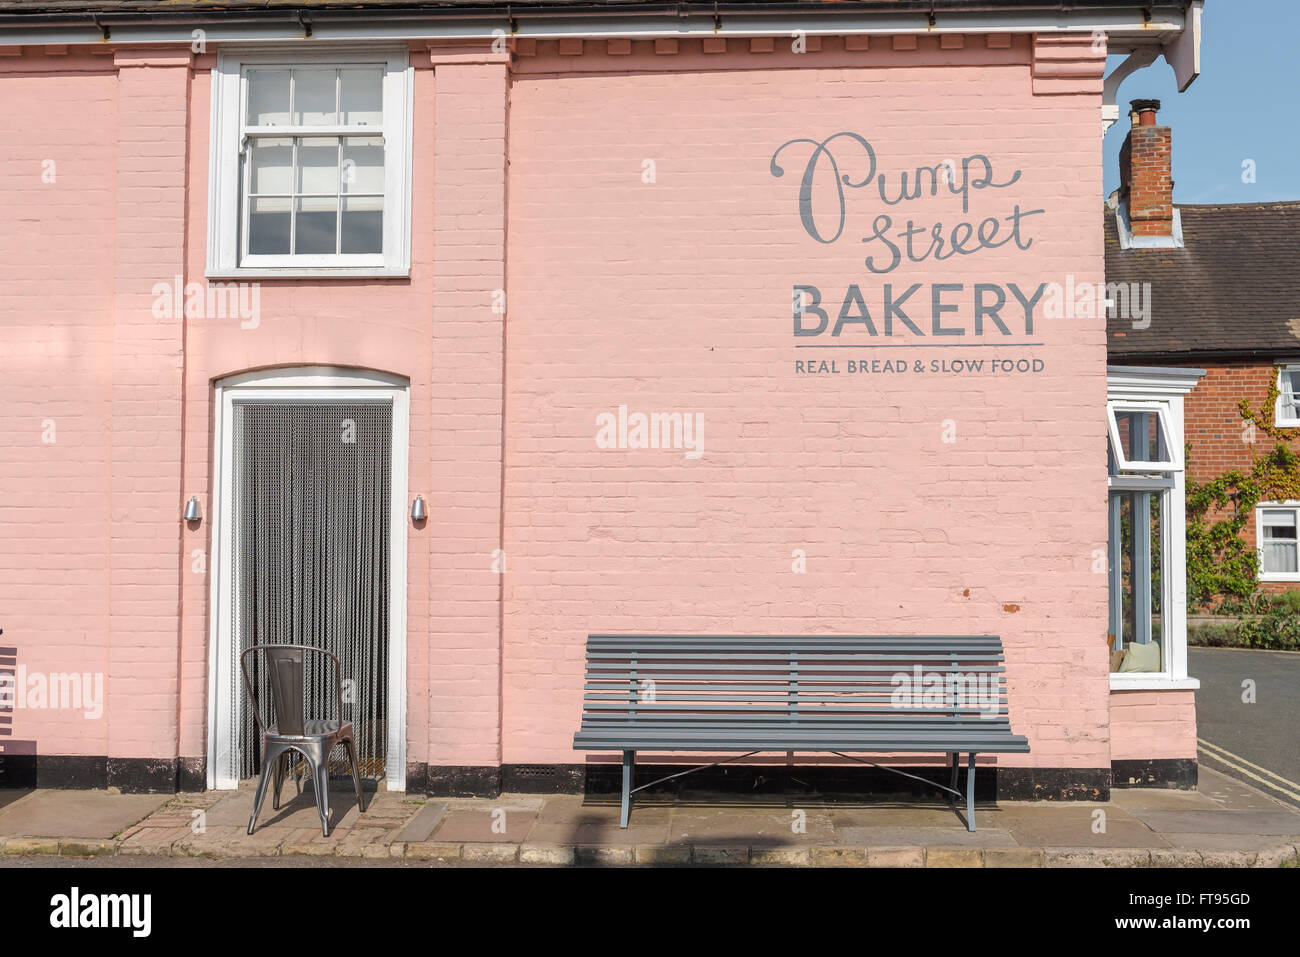 Pump Street Bakery, view of the pink wall and signage alongside the popular Pump Street Bakery in Orford, Suffolk, England. Stock Photo